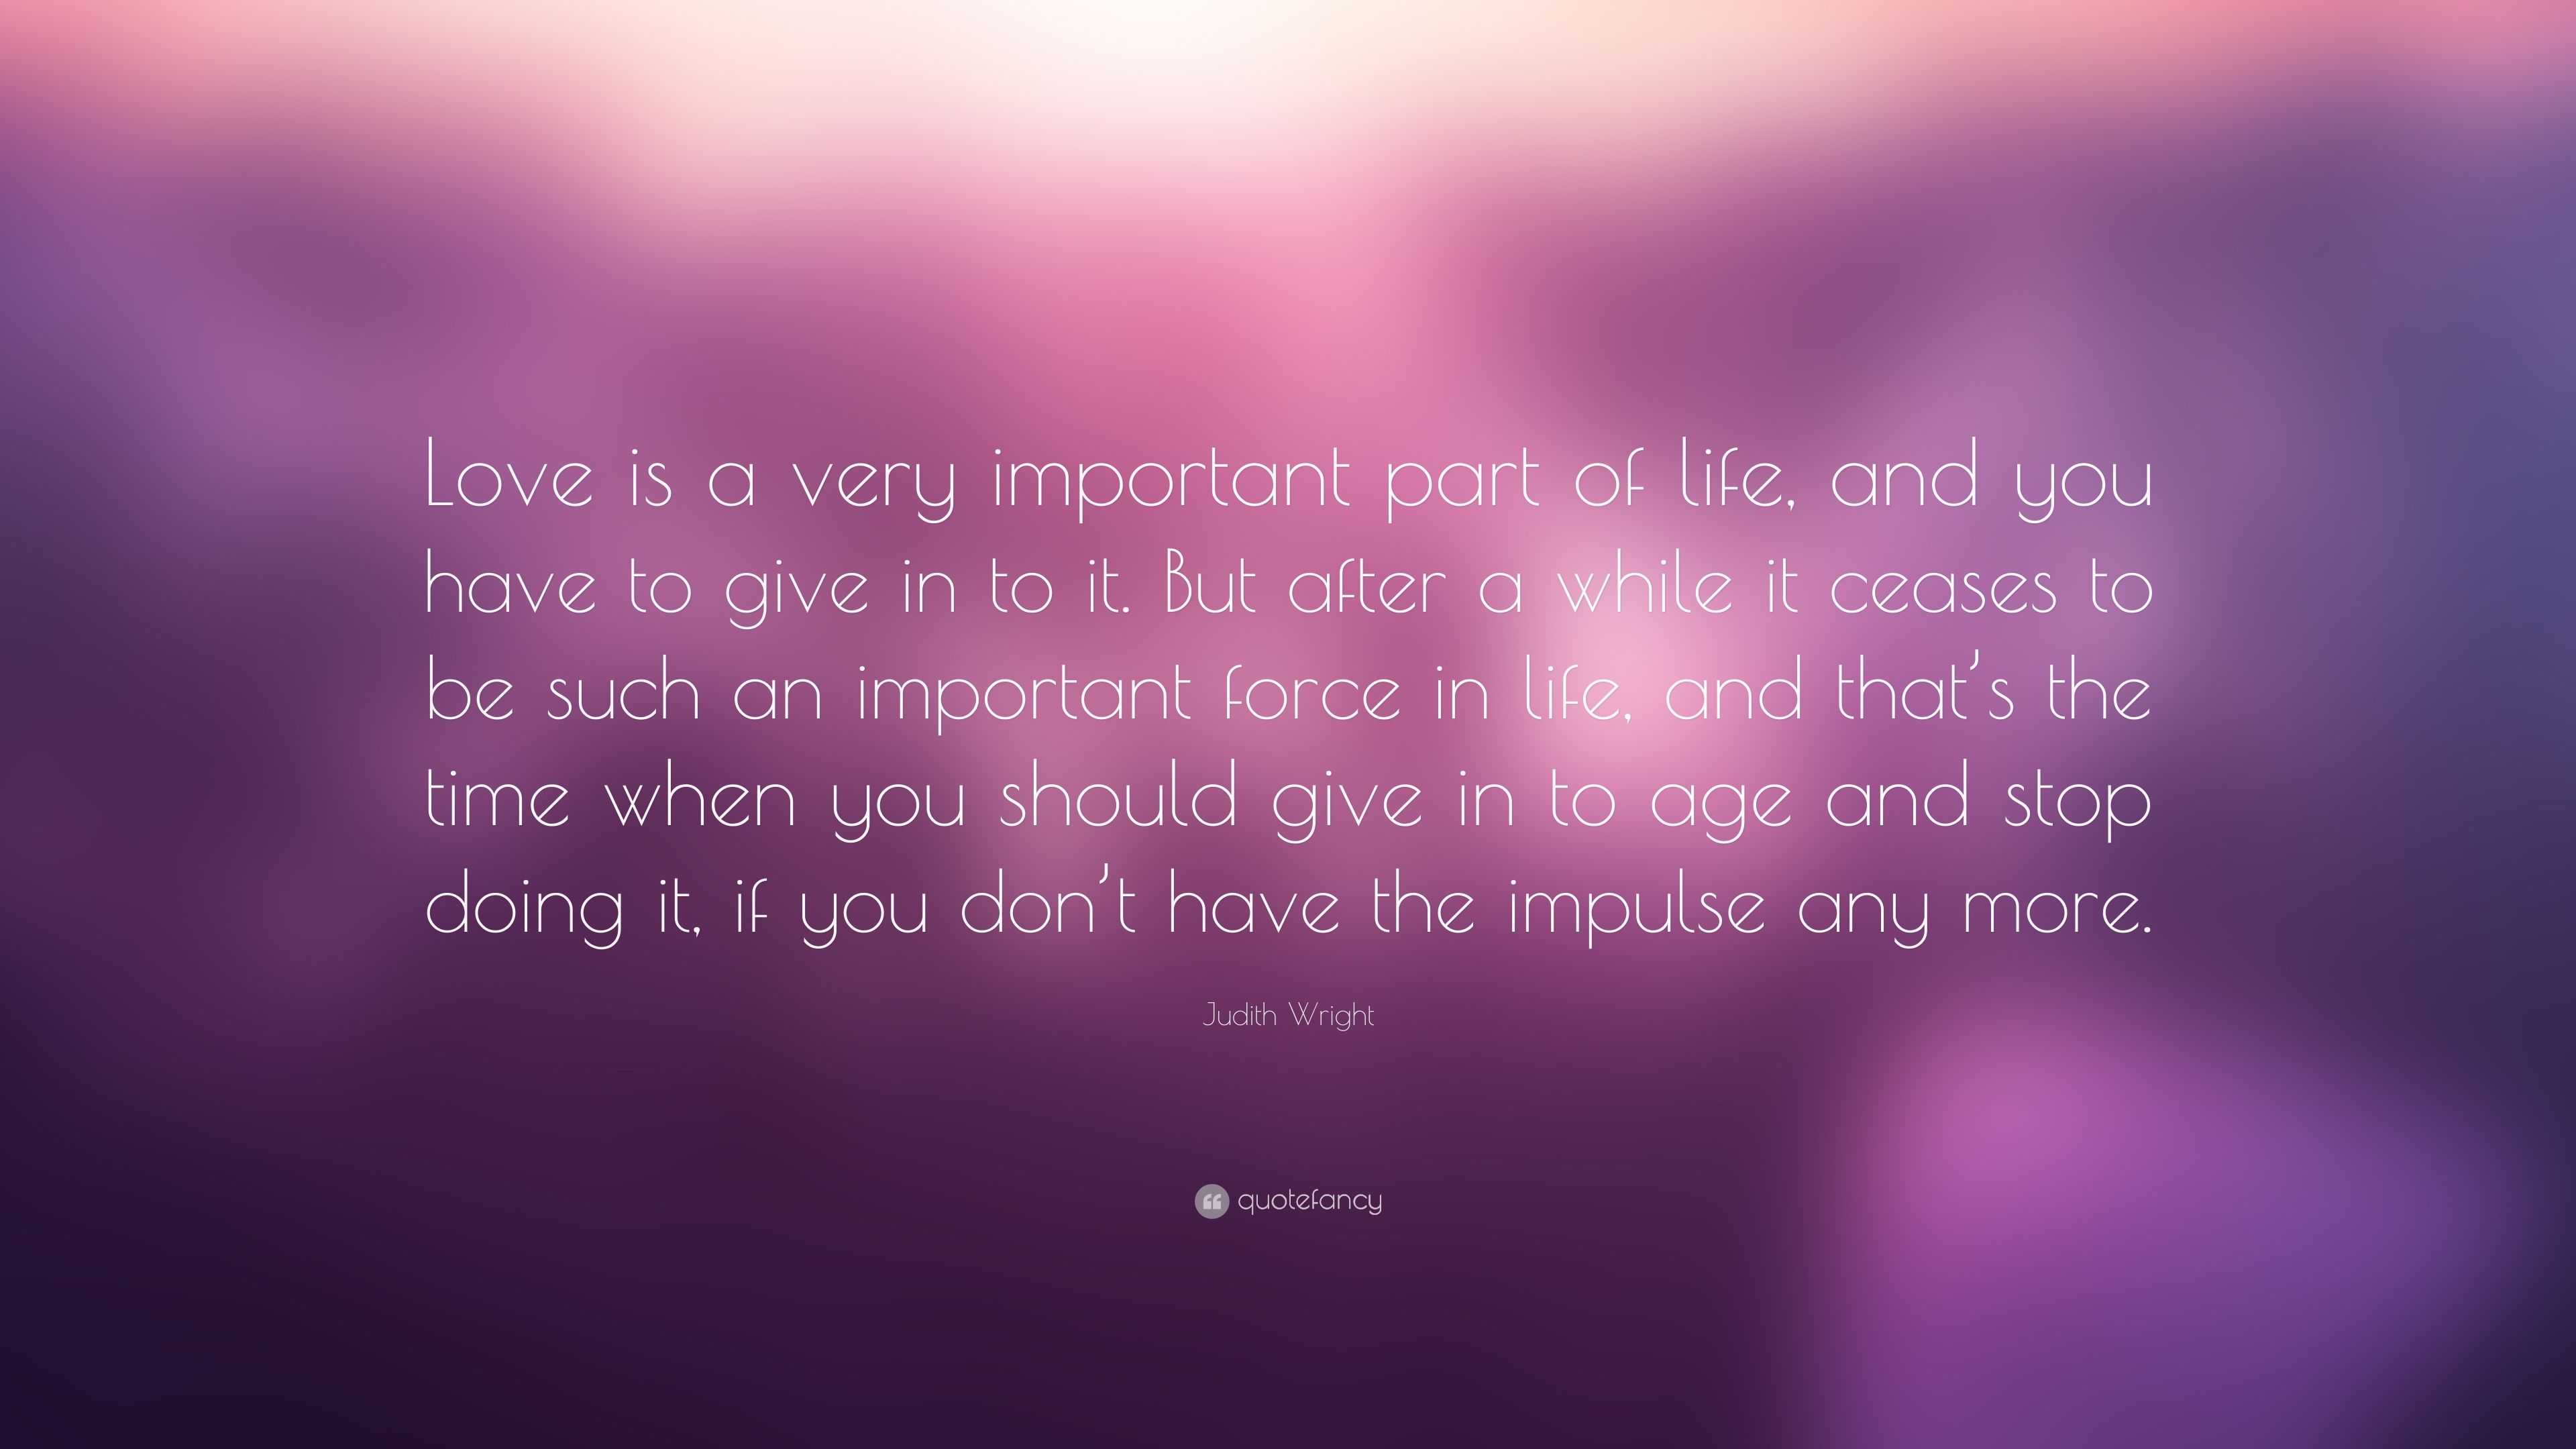 Judith Wright Quote “Love is a very important part of life and you